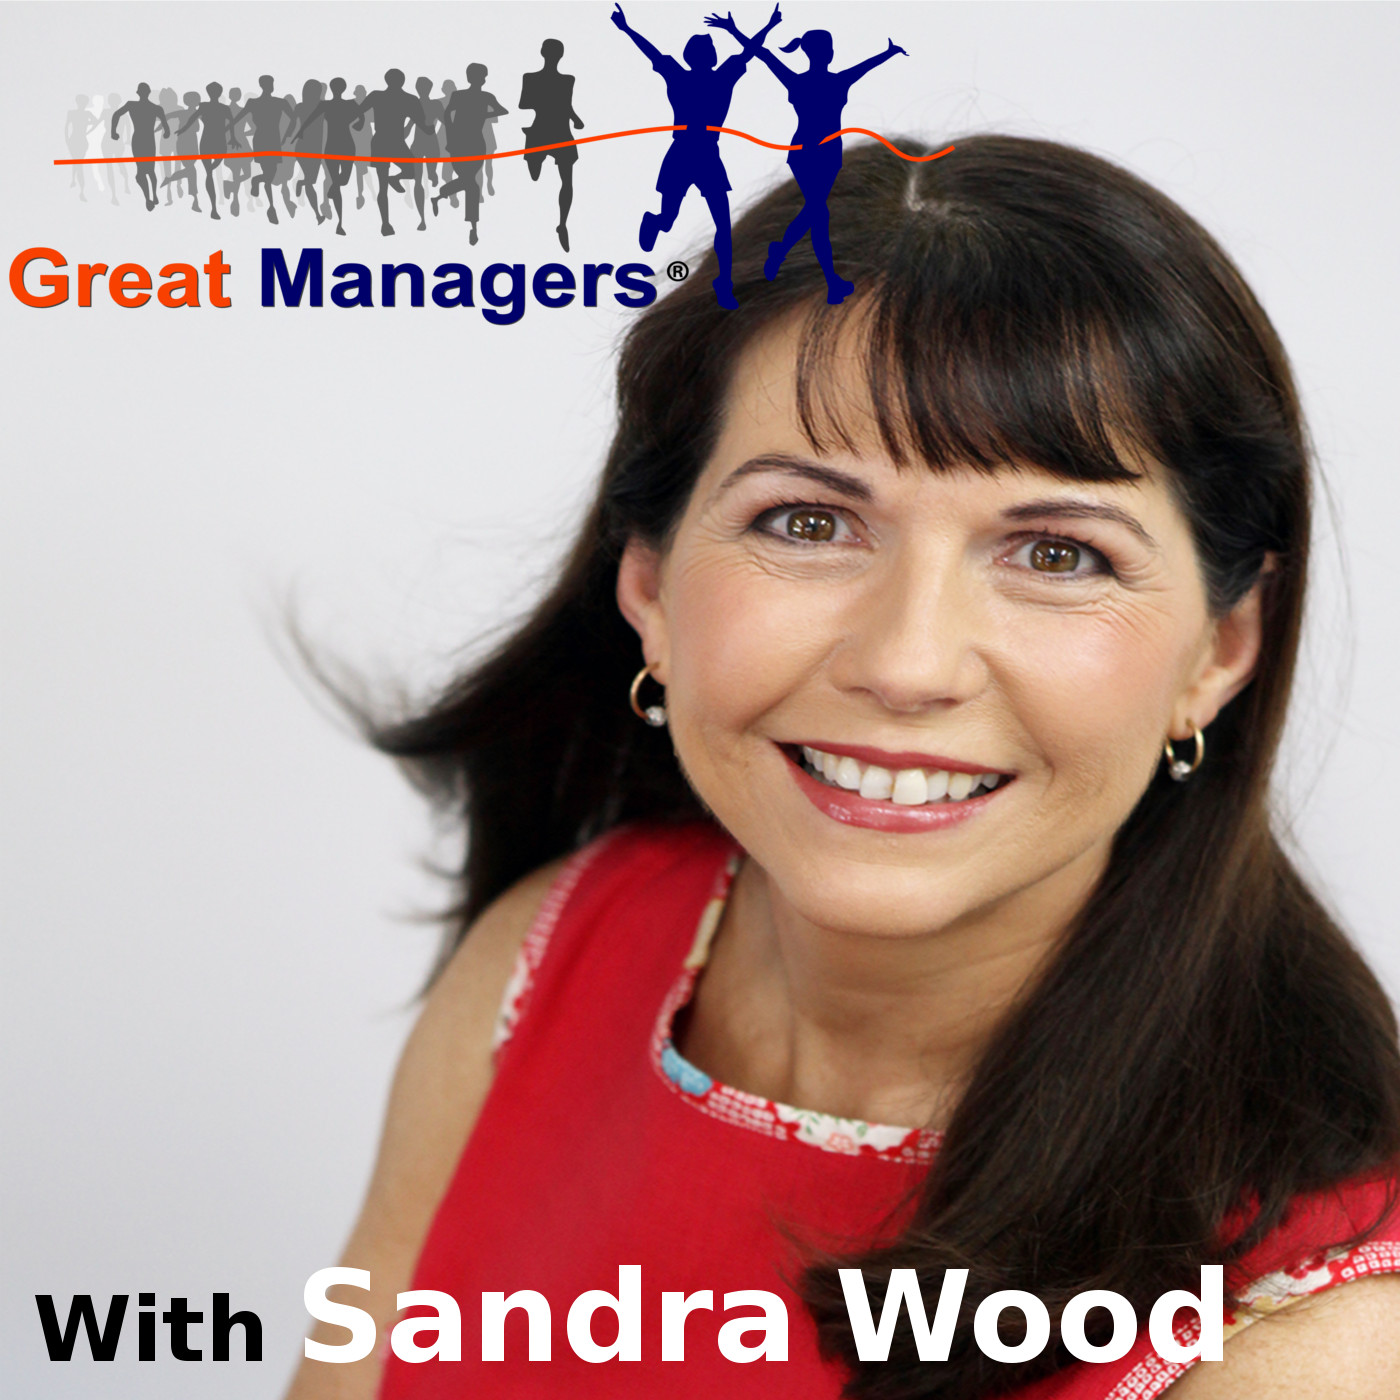 How To Build Trust in Teams | Great Managers® MasterClass